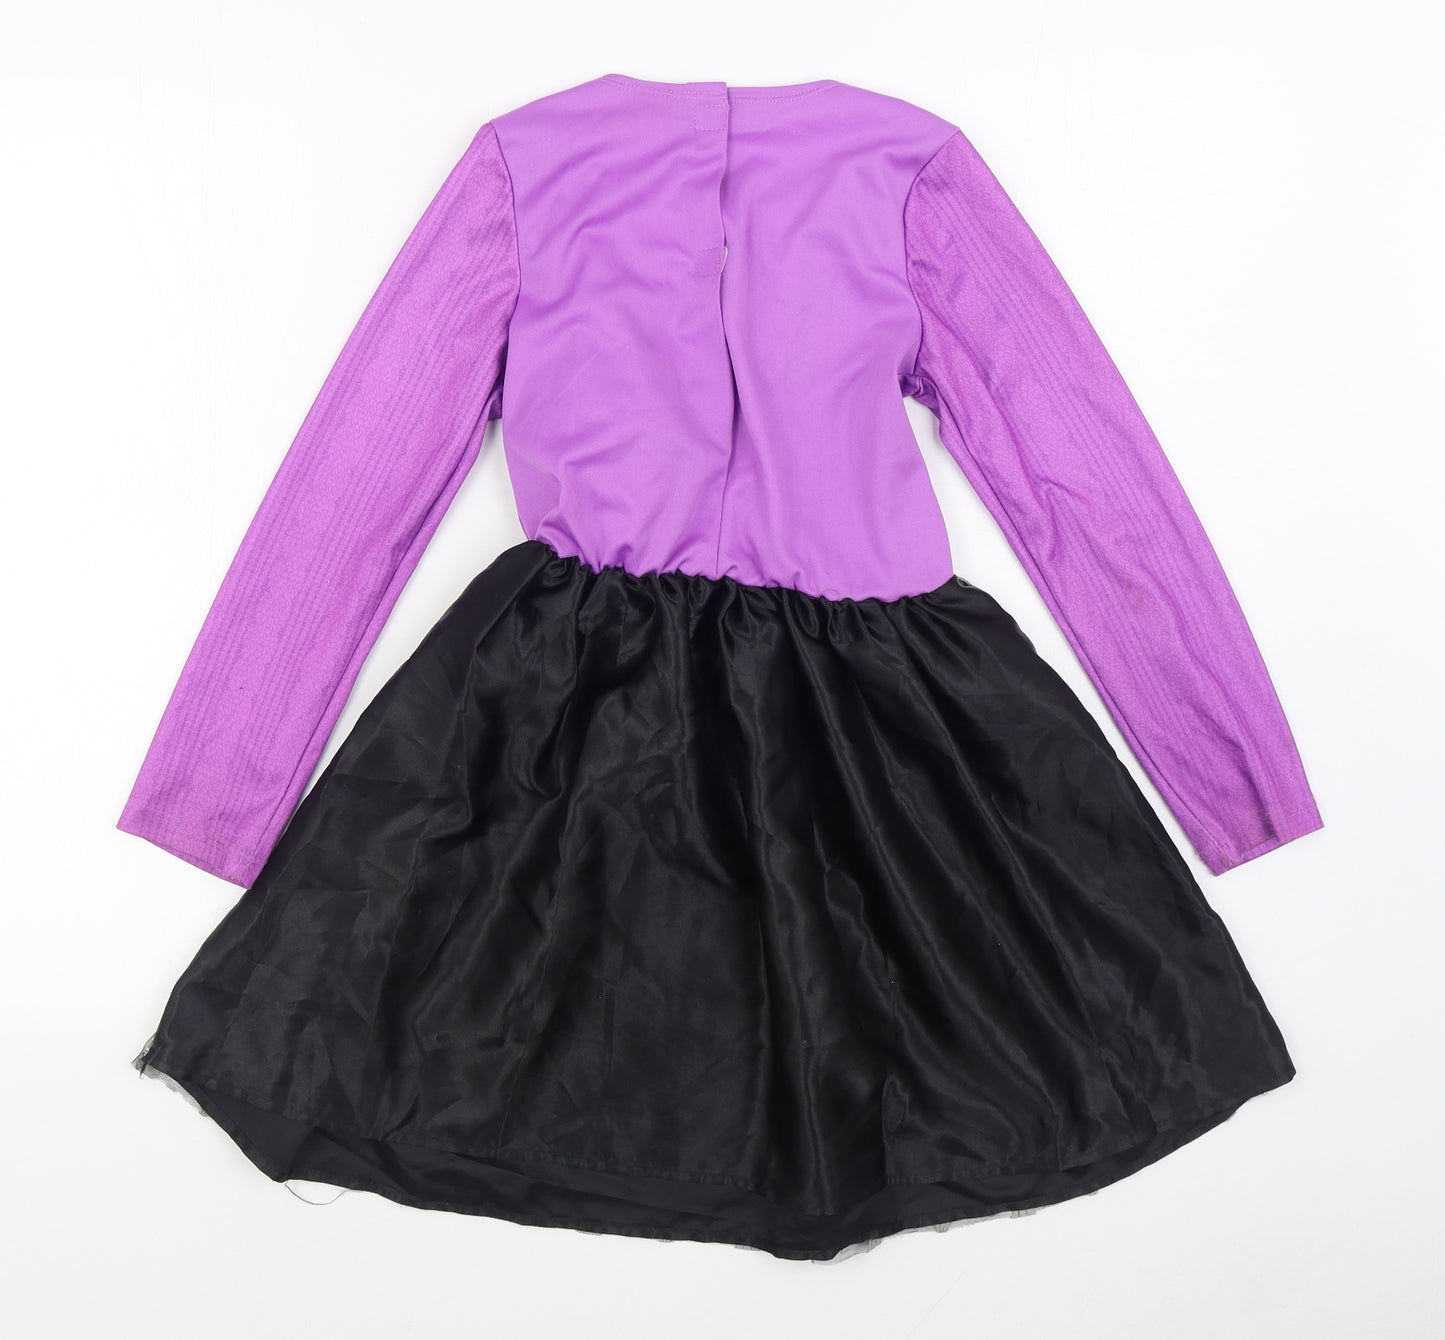 F&F Girls Purple Polyester Skater Dress Size 7-8 Years Round Neck Hook & Loop